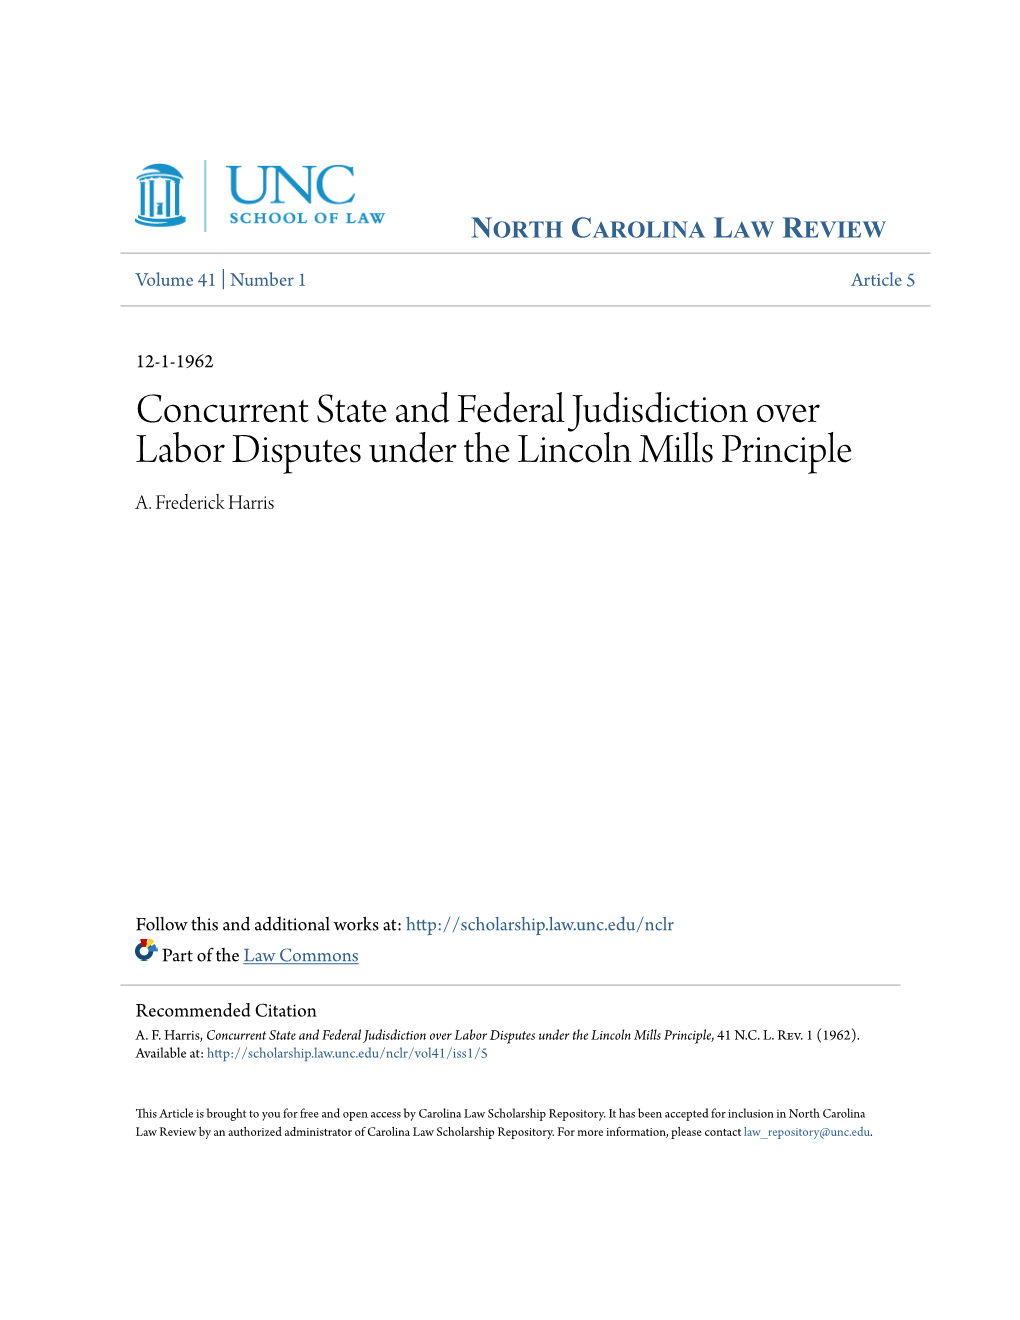 Concurrent State and Federal Judisdiction Over Labor Disputes Under the Lincoln Mills Principle A